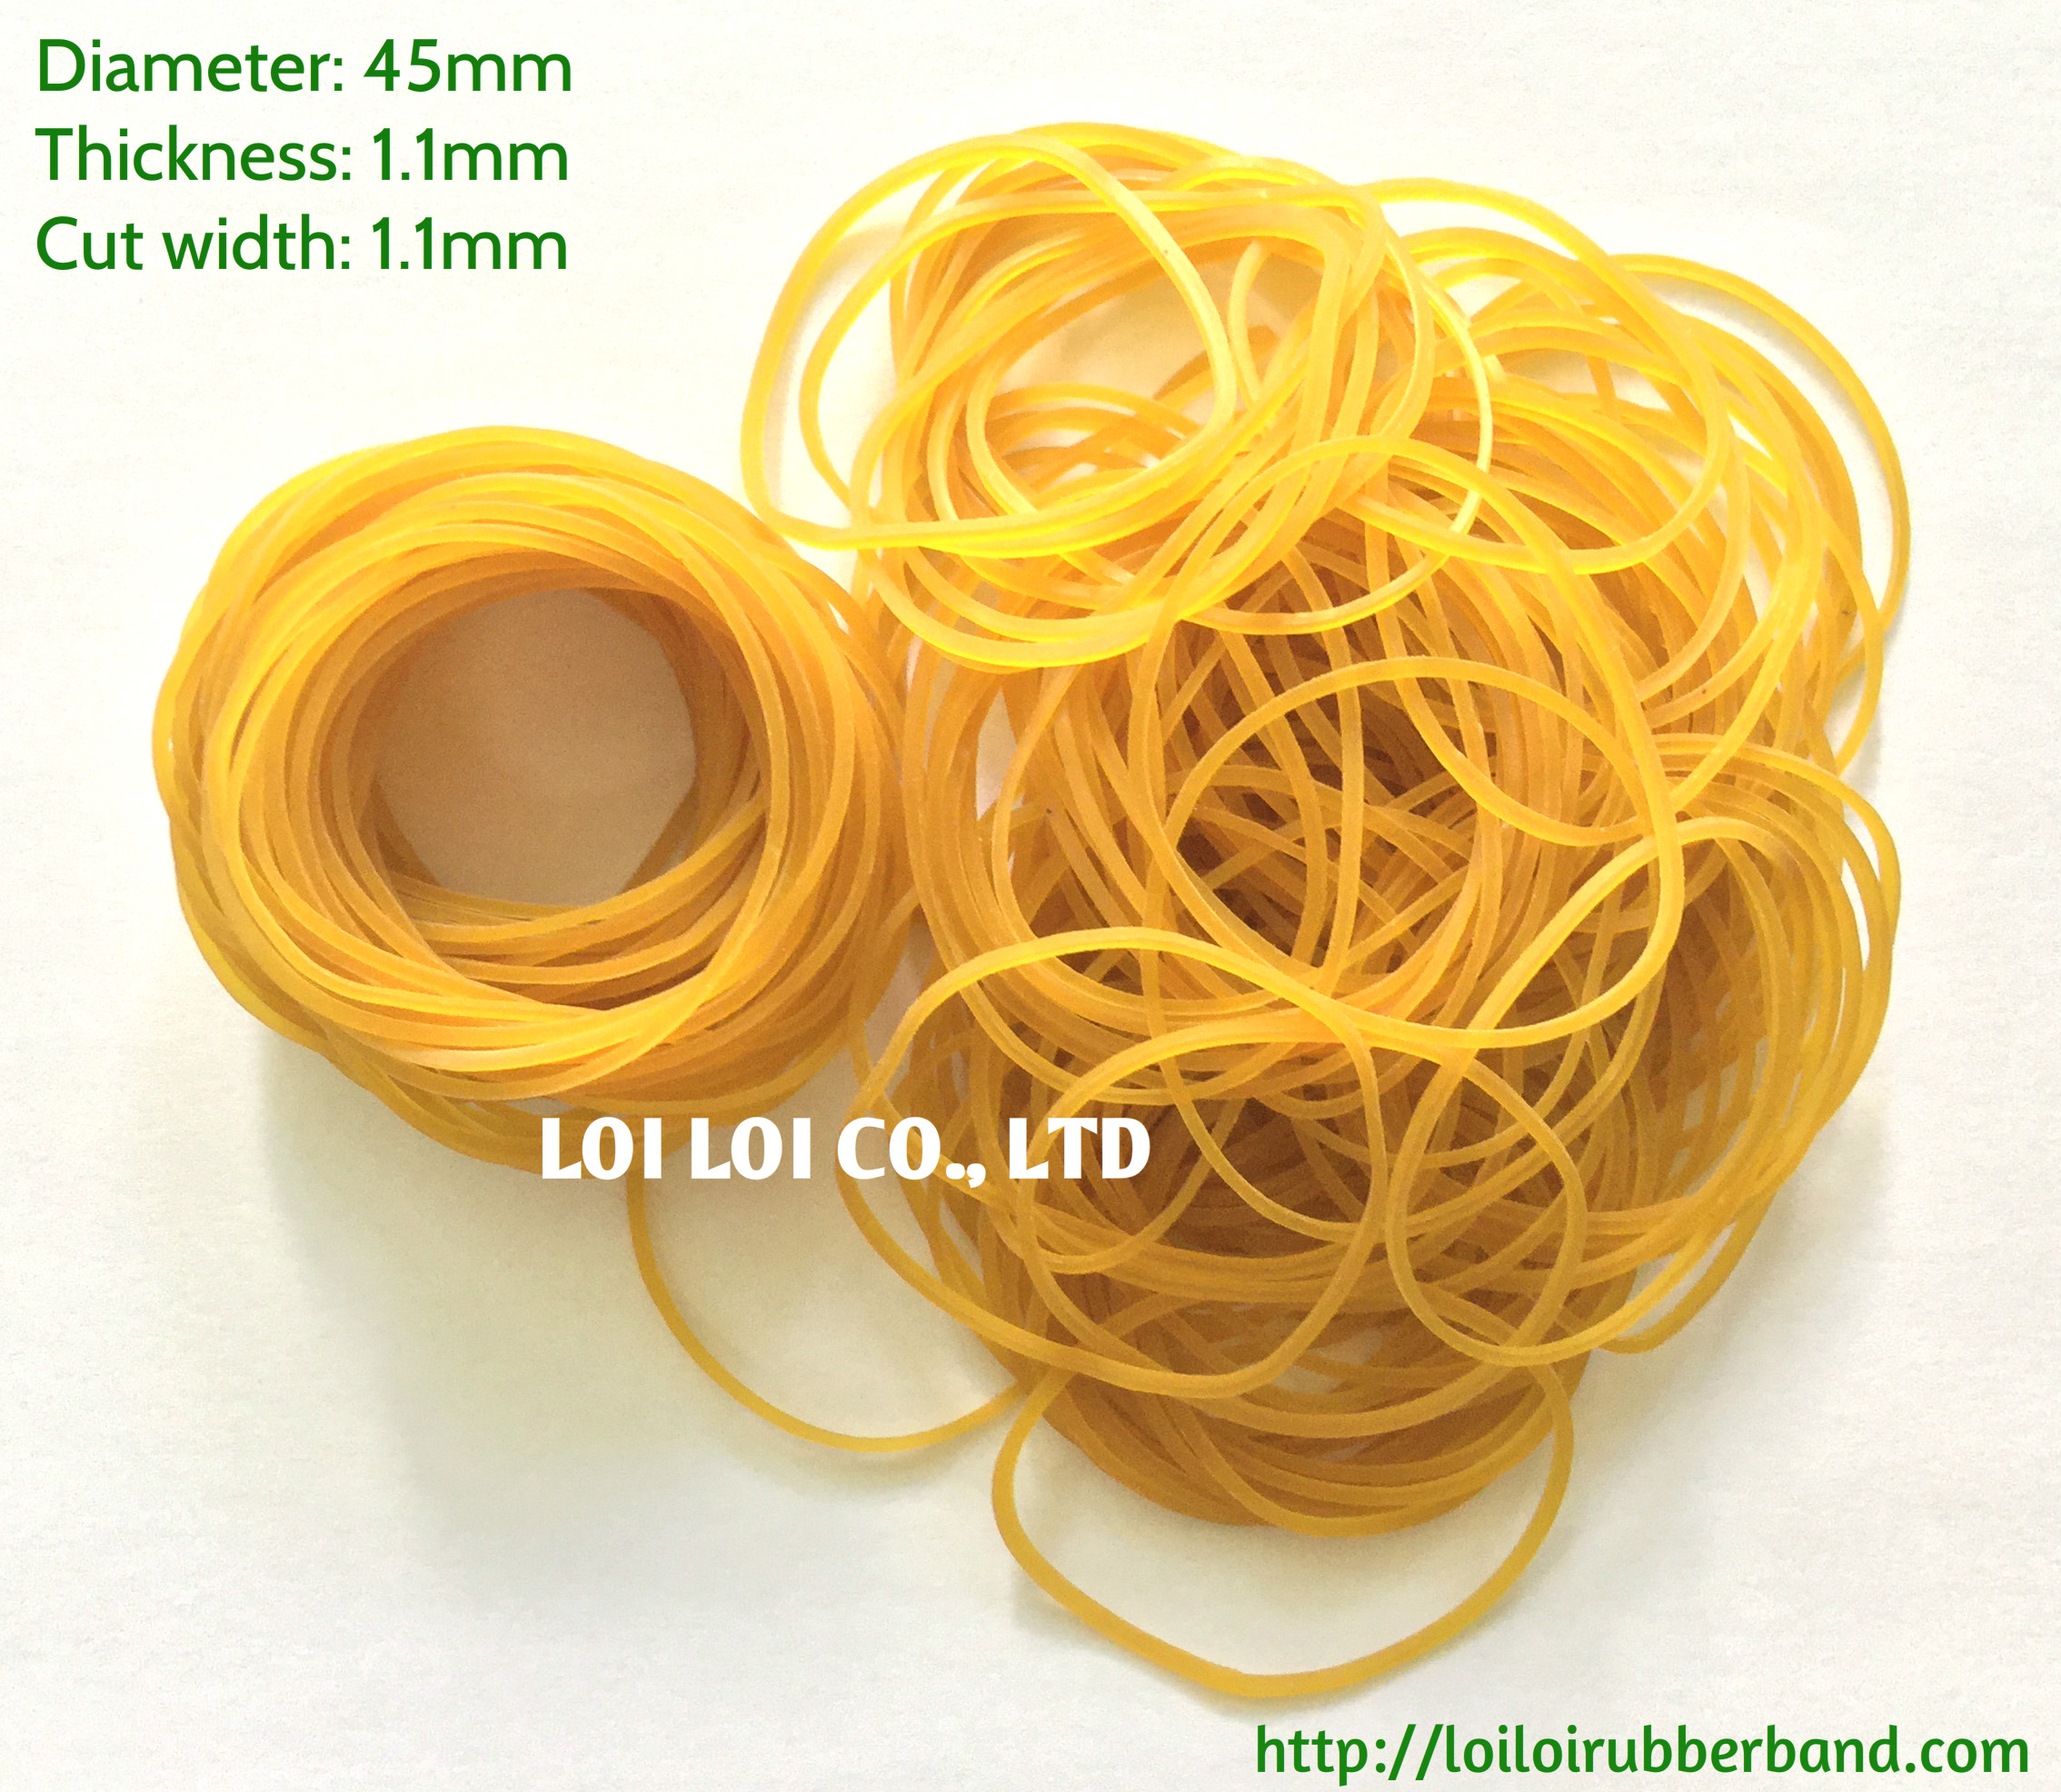 Thin rubber band HOT selling bright color - Unbreakable and elasticity quality